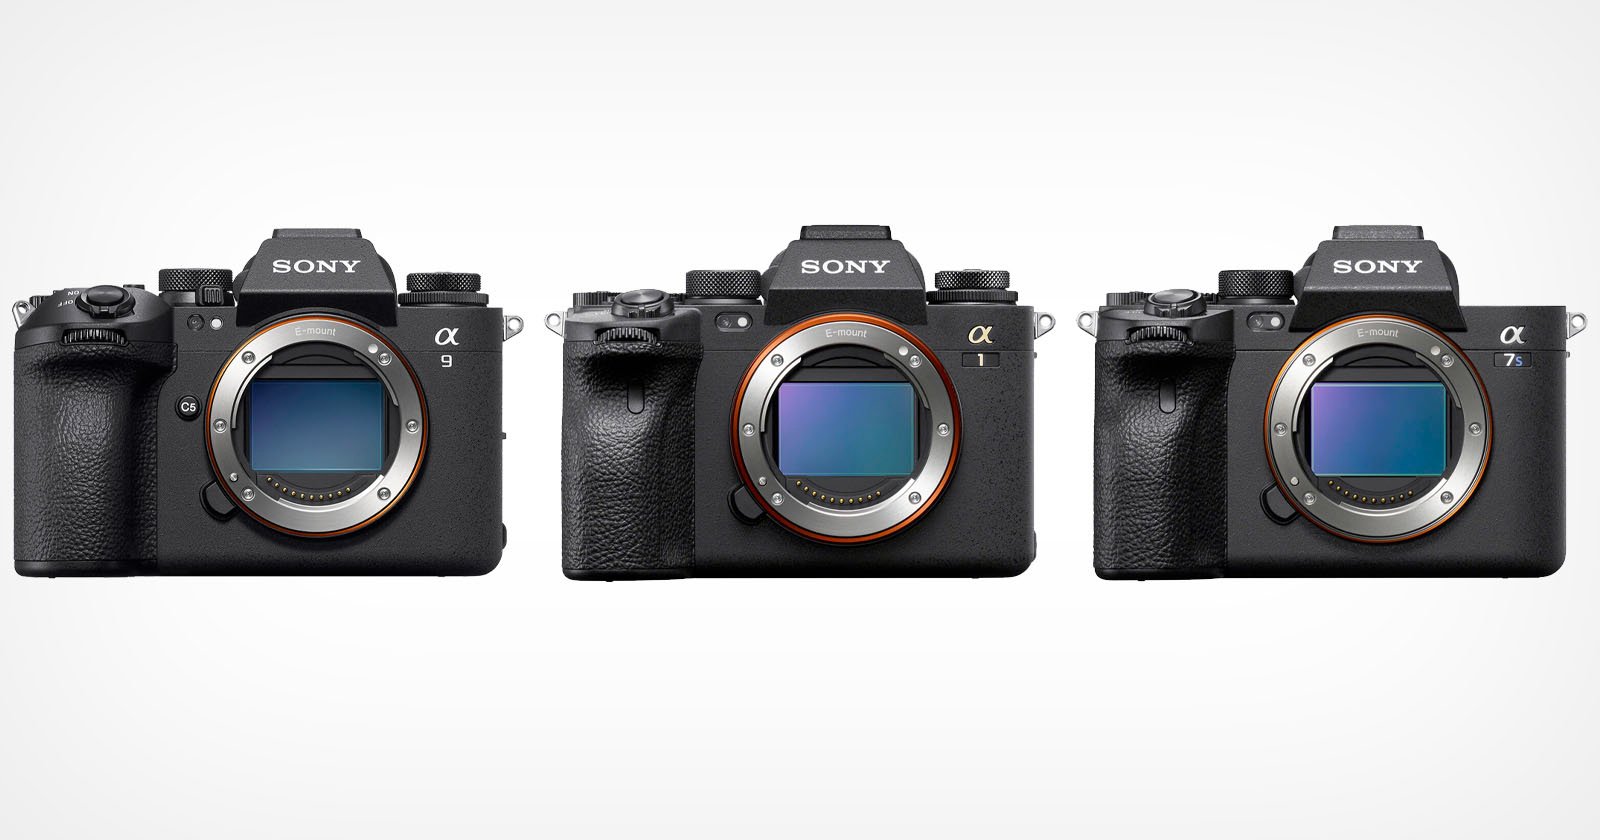  sony will finally bring features old cameras 